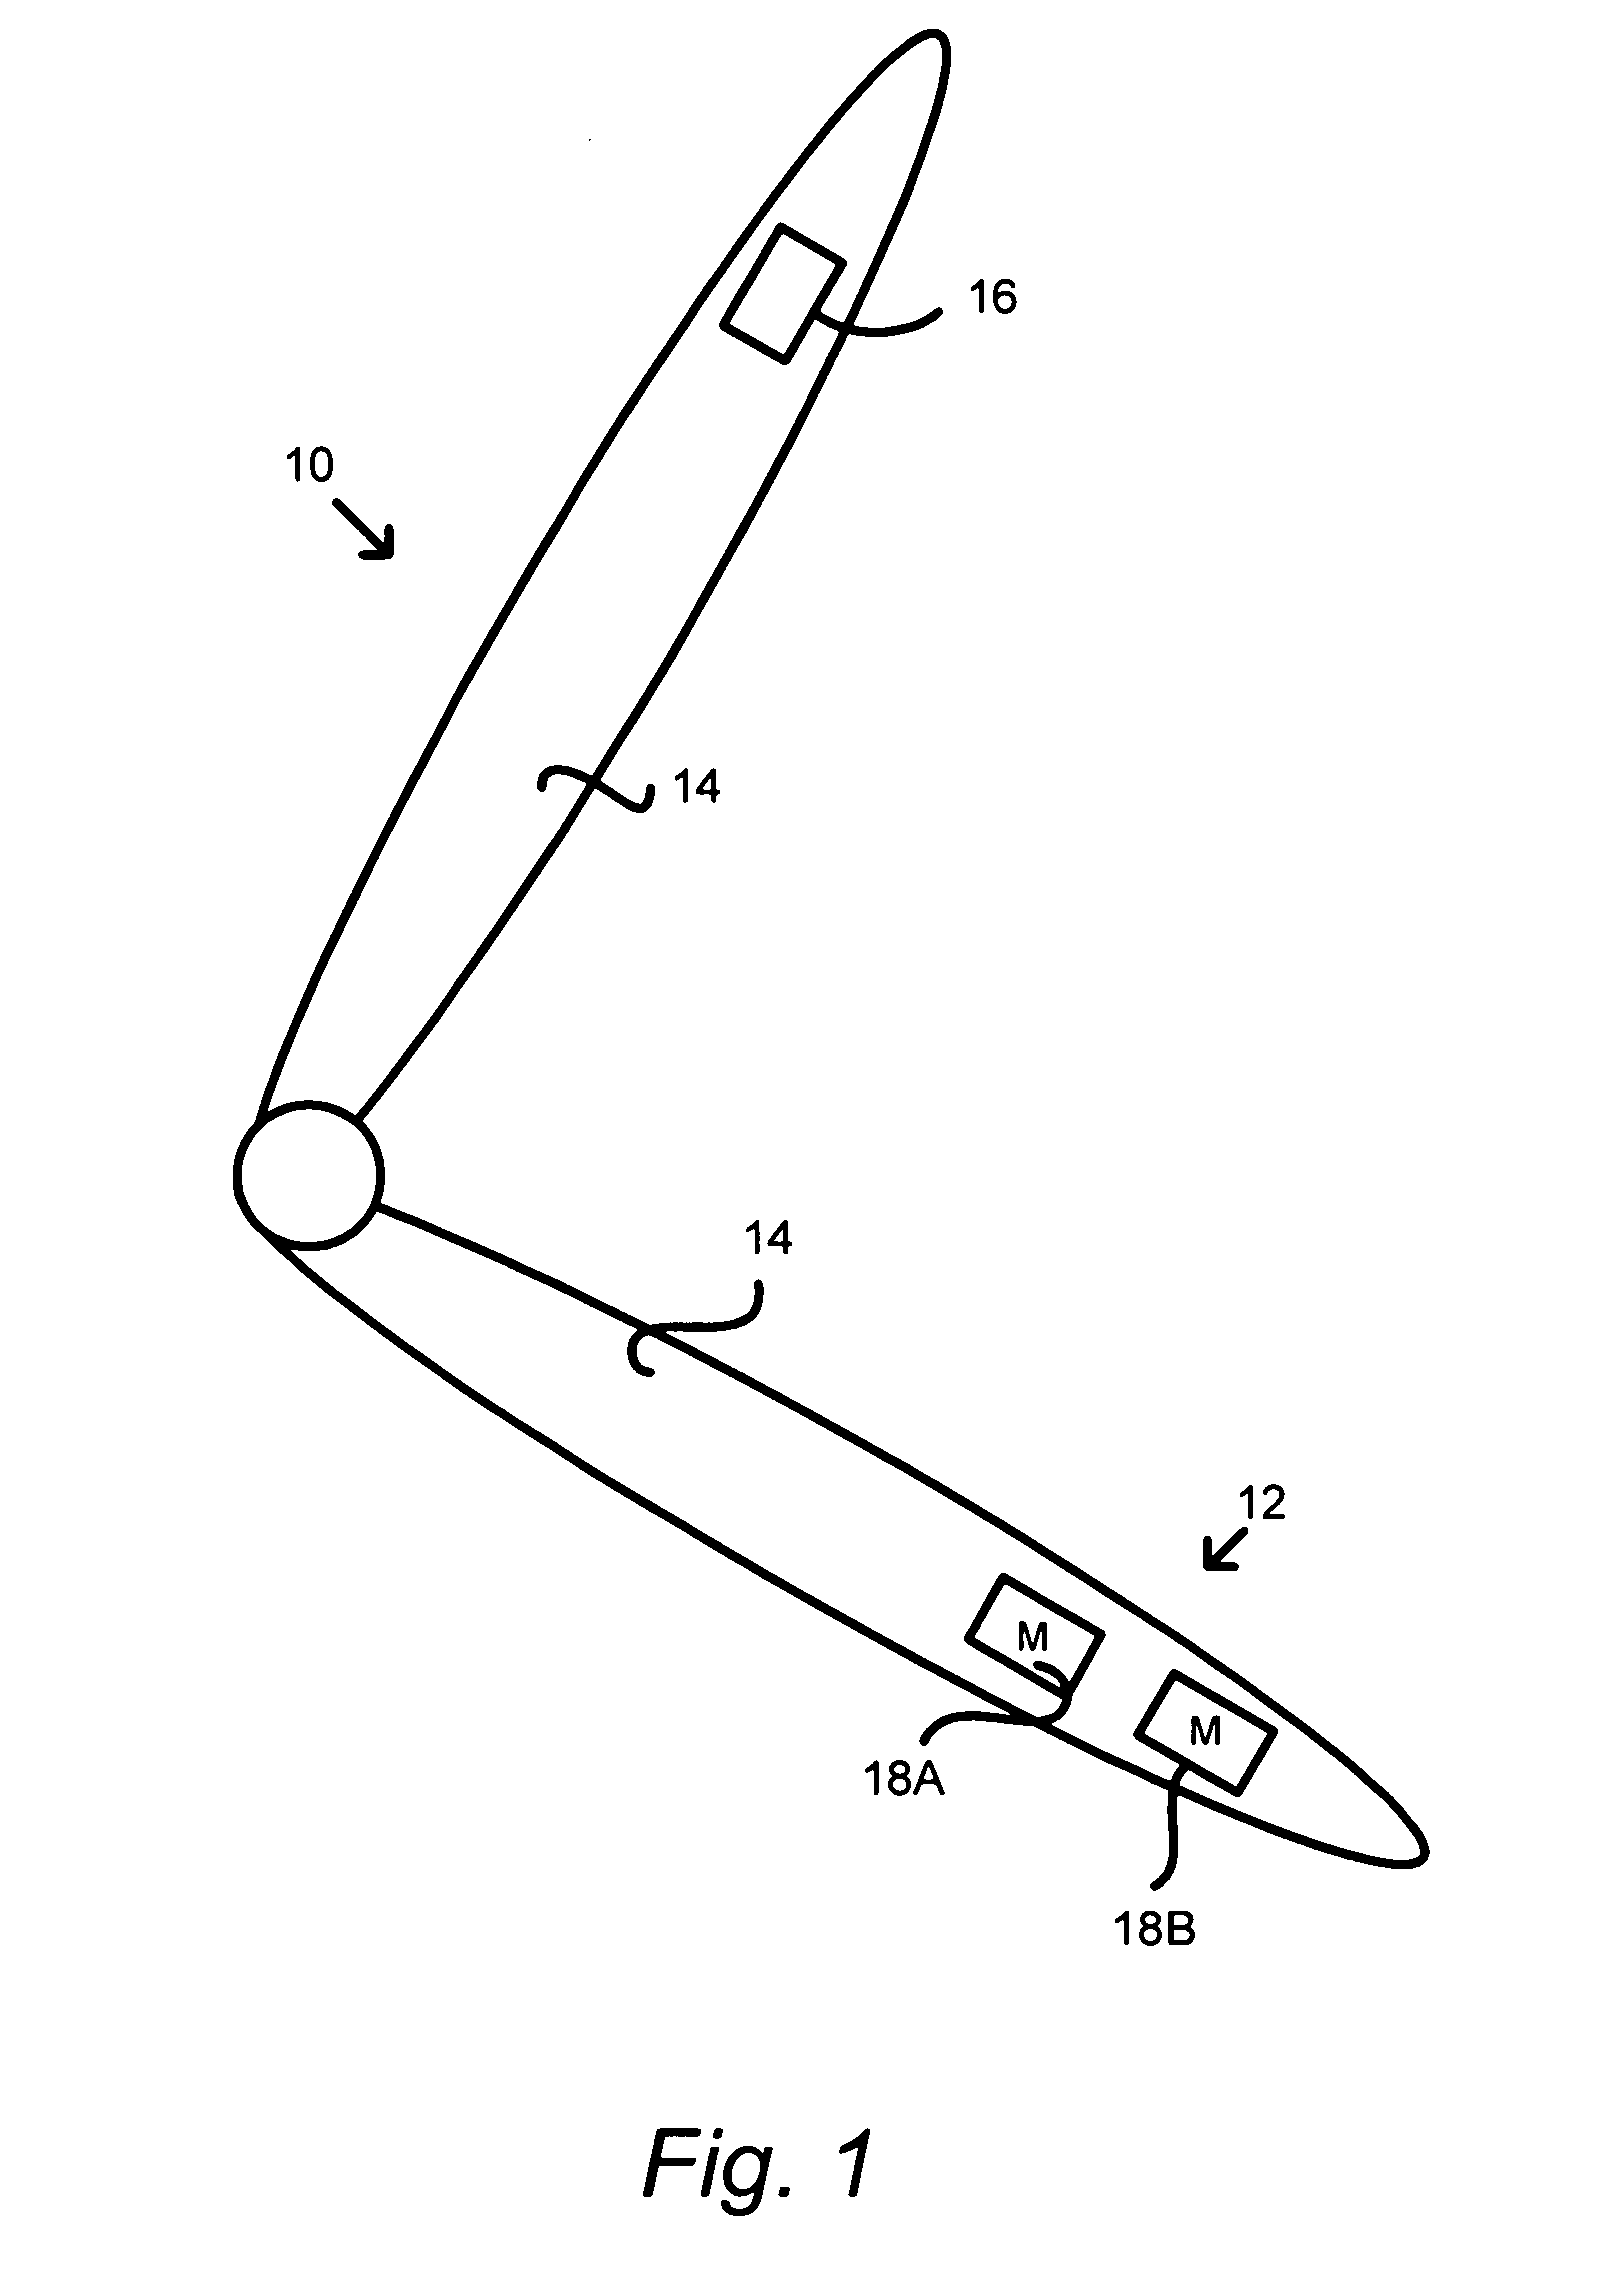 Noise mitigating microphone system and method